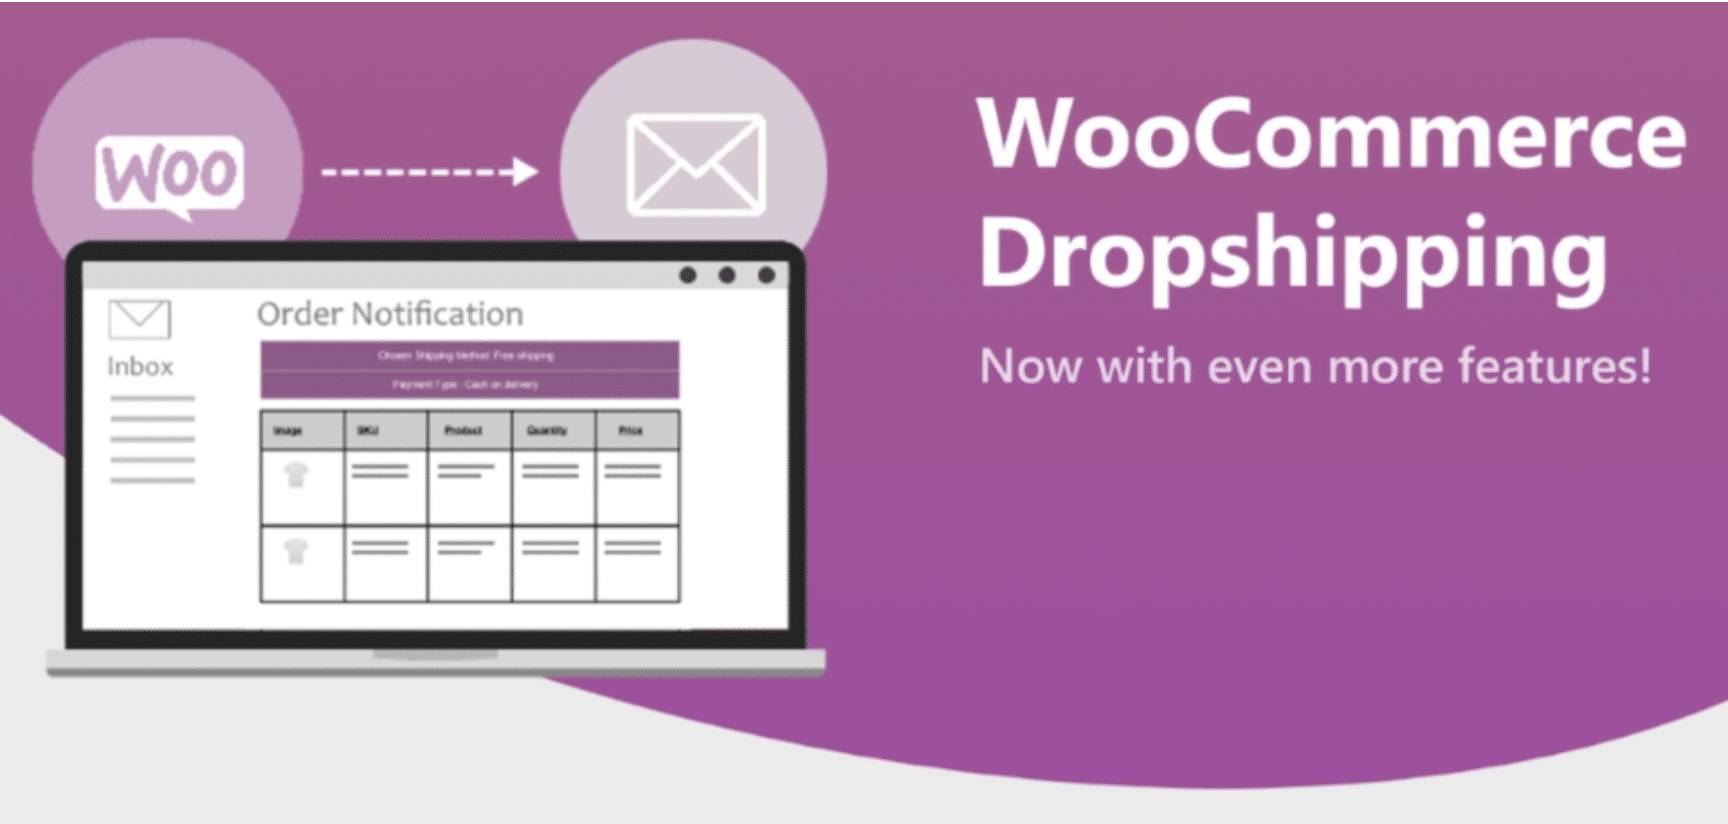 WooCommerce Dropshipping is a WordPress dropshipping extension.